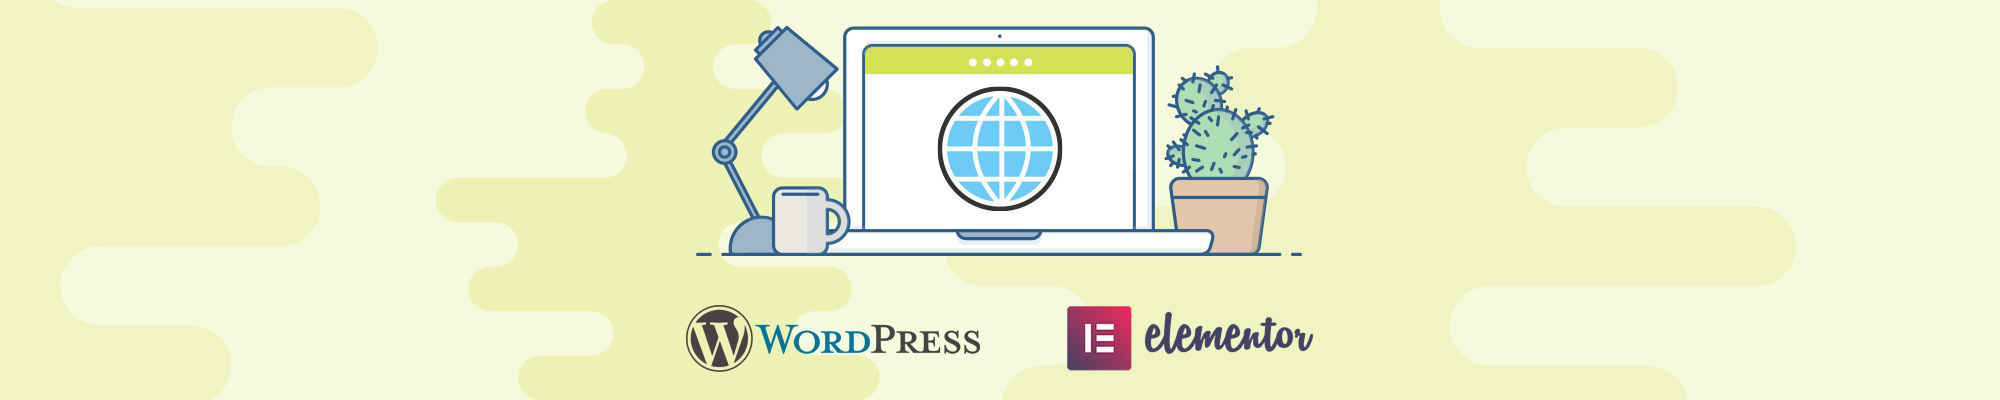 WordPress Website & Themes / Templates with Elementor Pro